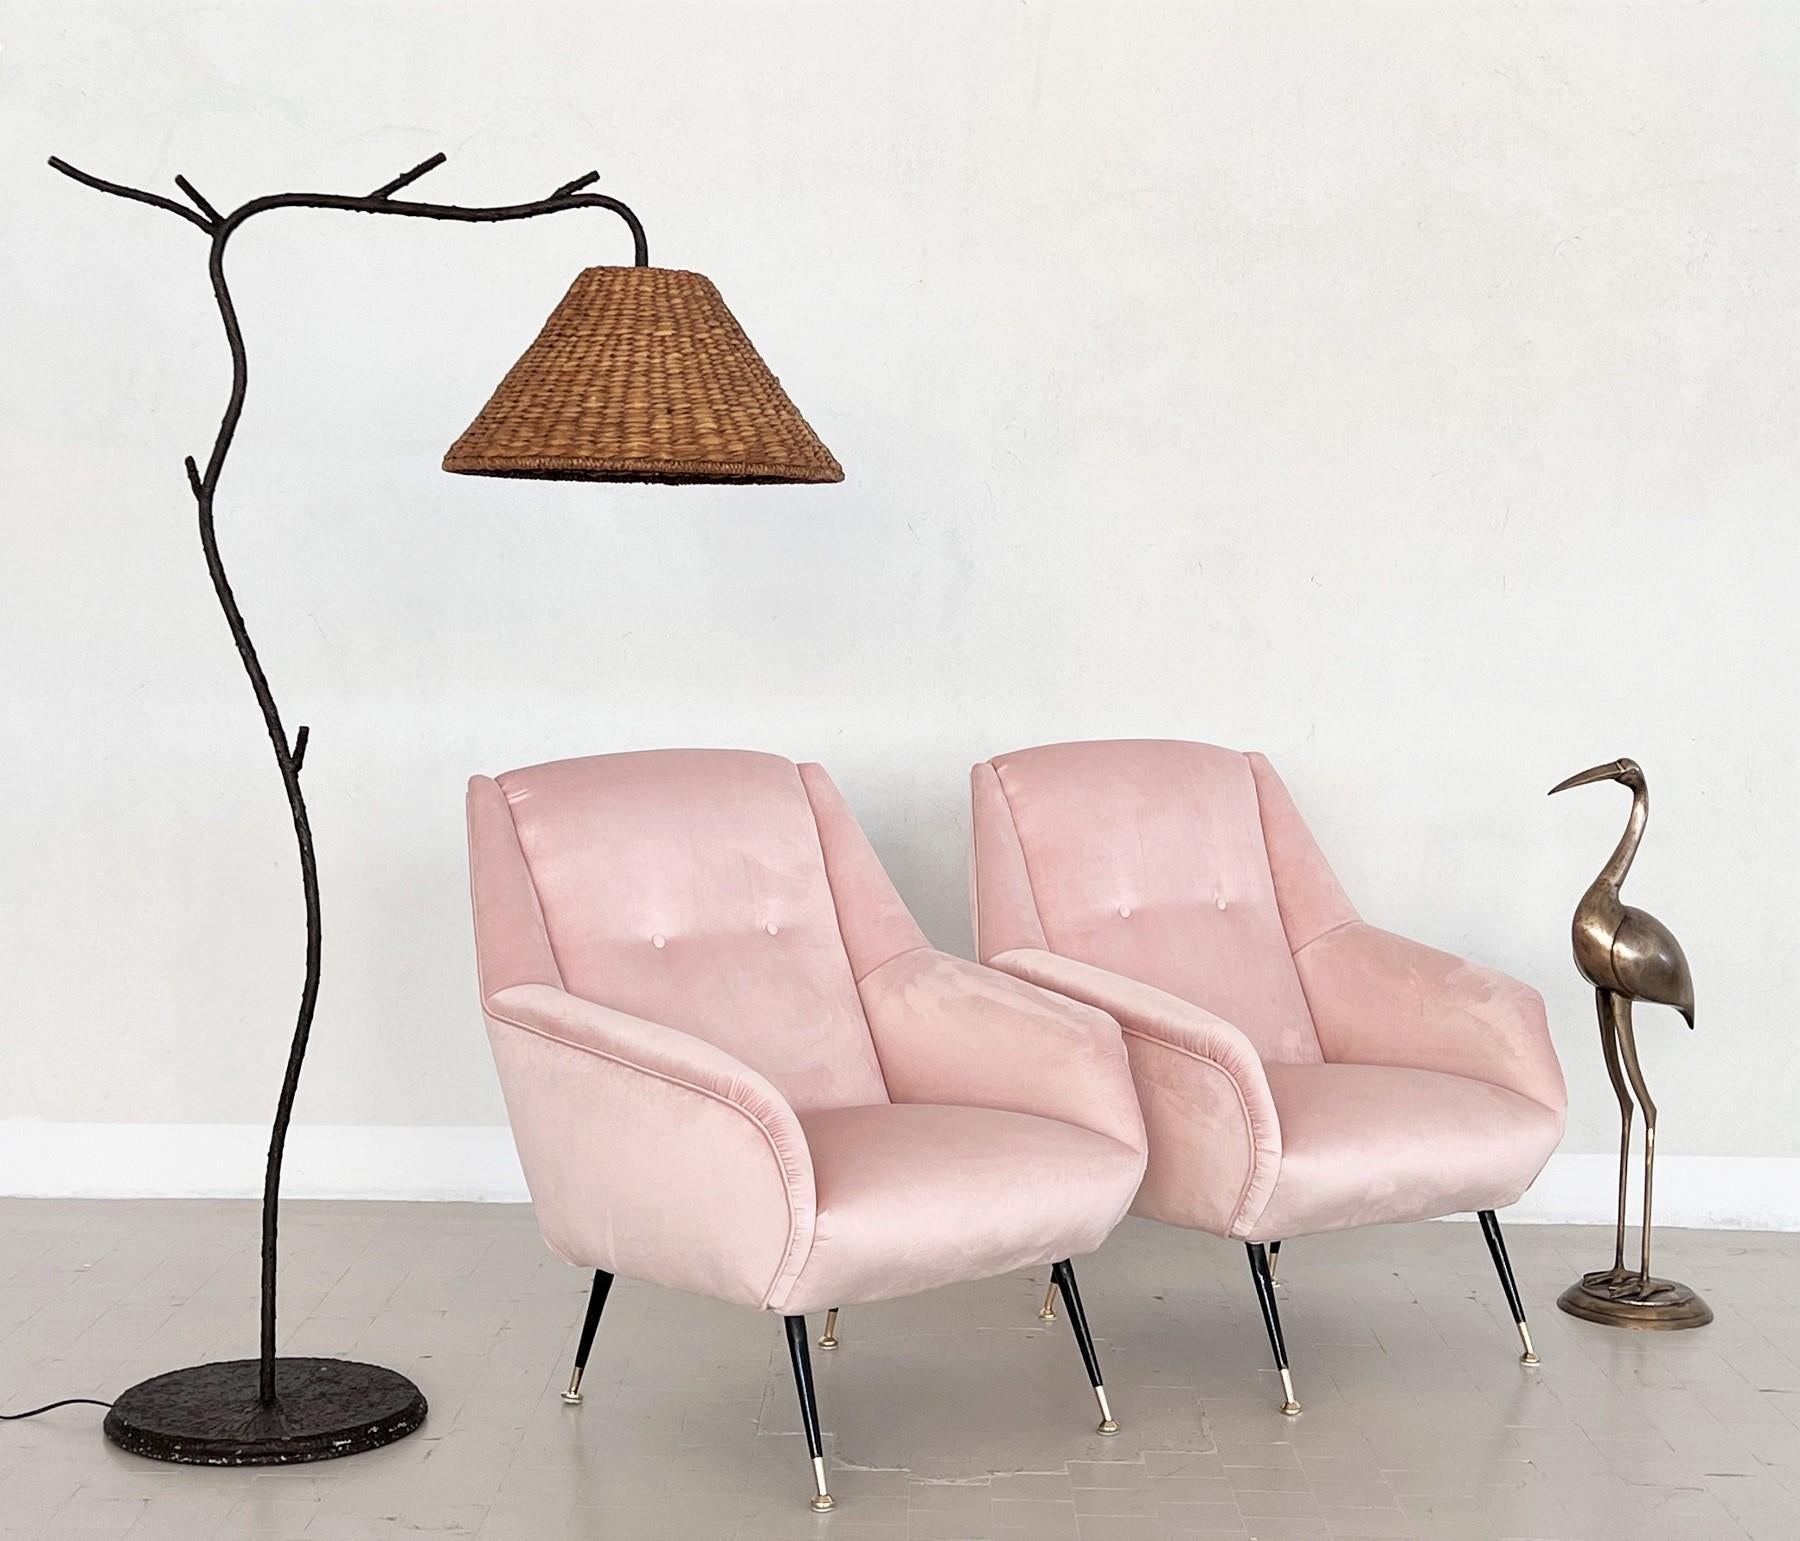 Elegant and beautiful pair of two Italian original mid-century armchairs or lounge chairs from the 1950s with black metal feet and shiny brass tips.
Completely restored internally with quality material and outside reupholstered with soft pink